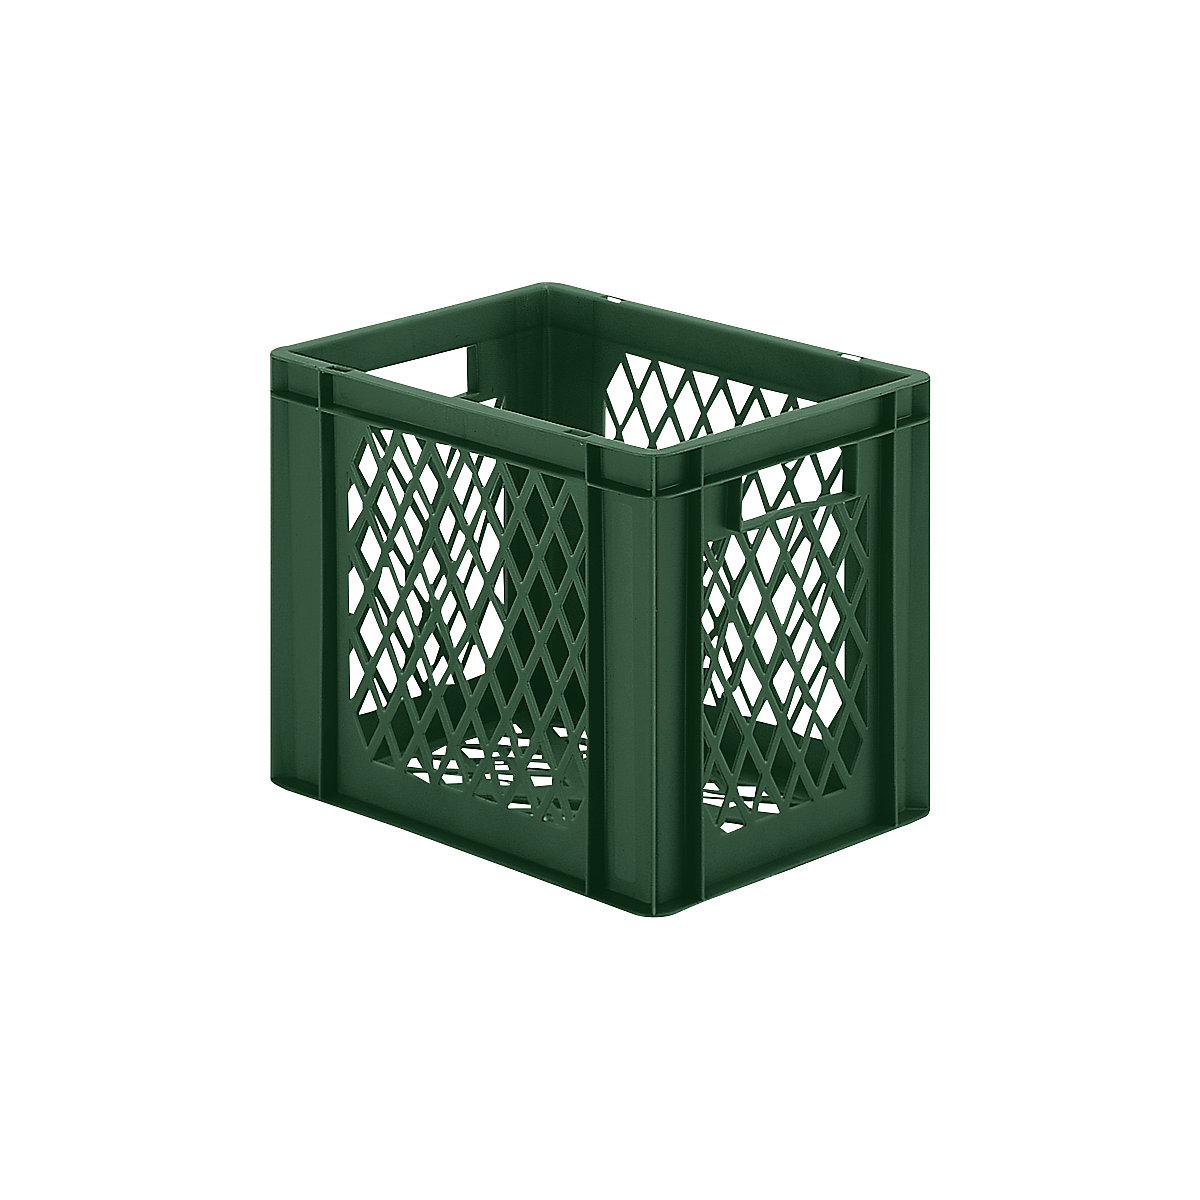 Euro stacking container, perforated walls and base, LxWxH 400 x 300 x 320 mm, green, pack of 5